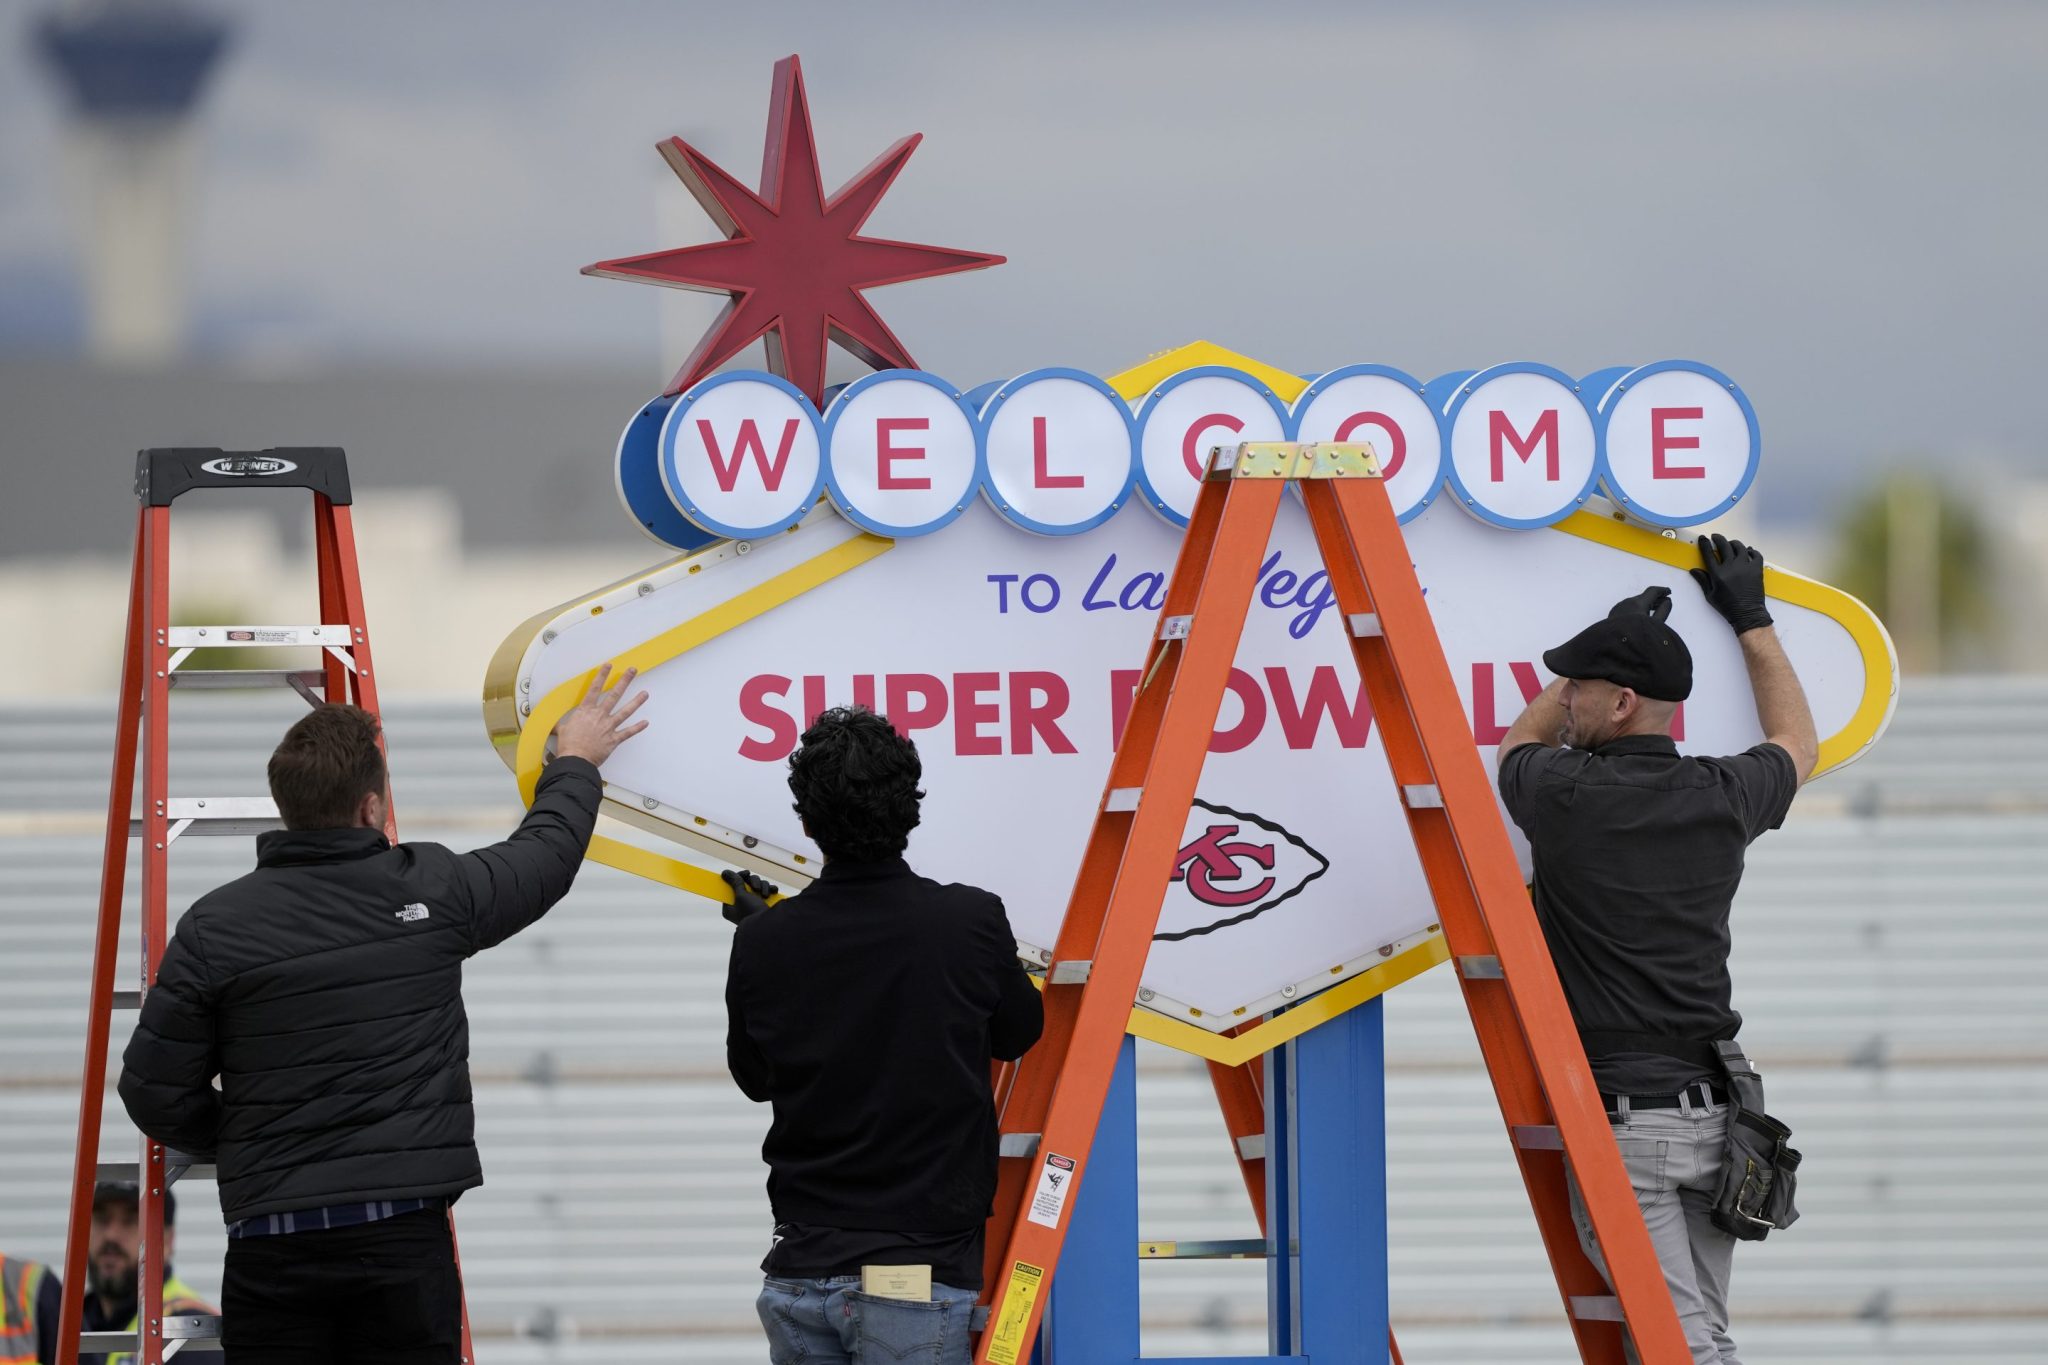 Las Vegas Super Bowl Attractions: Private jets, Guy Fieri’s free tailgate